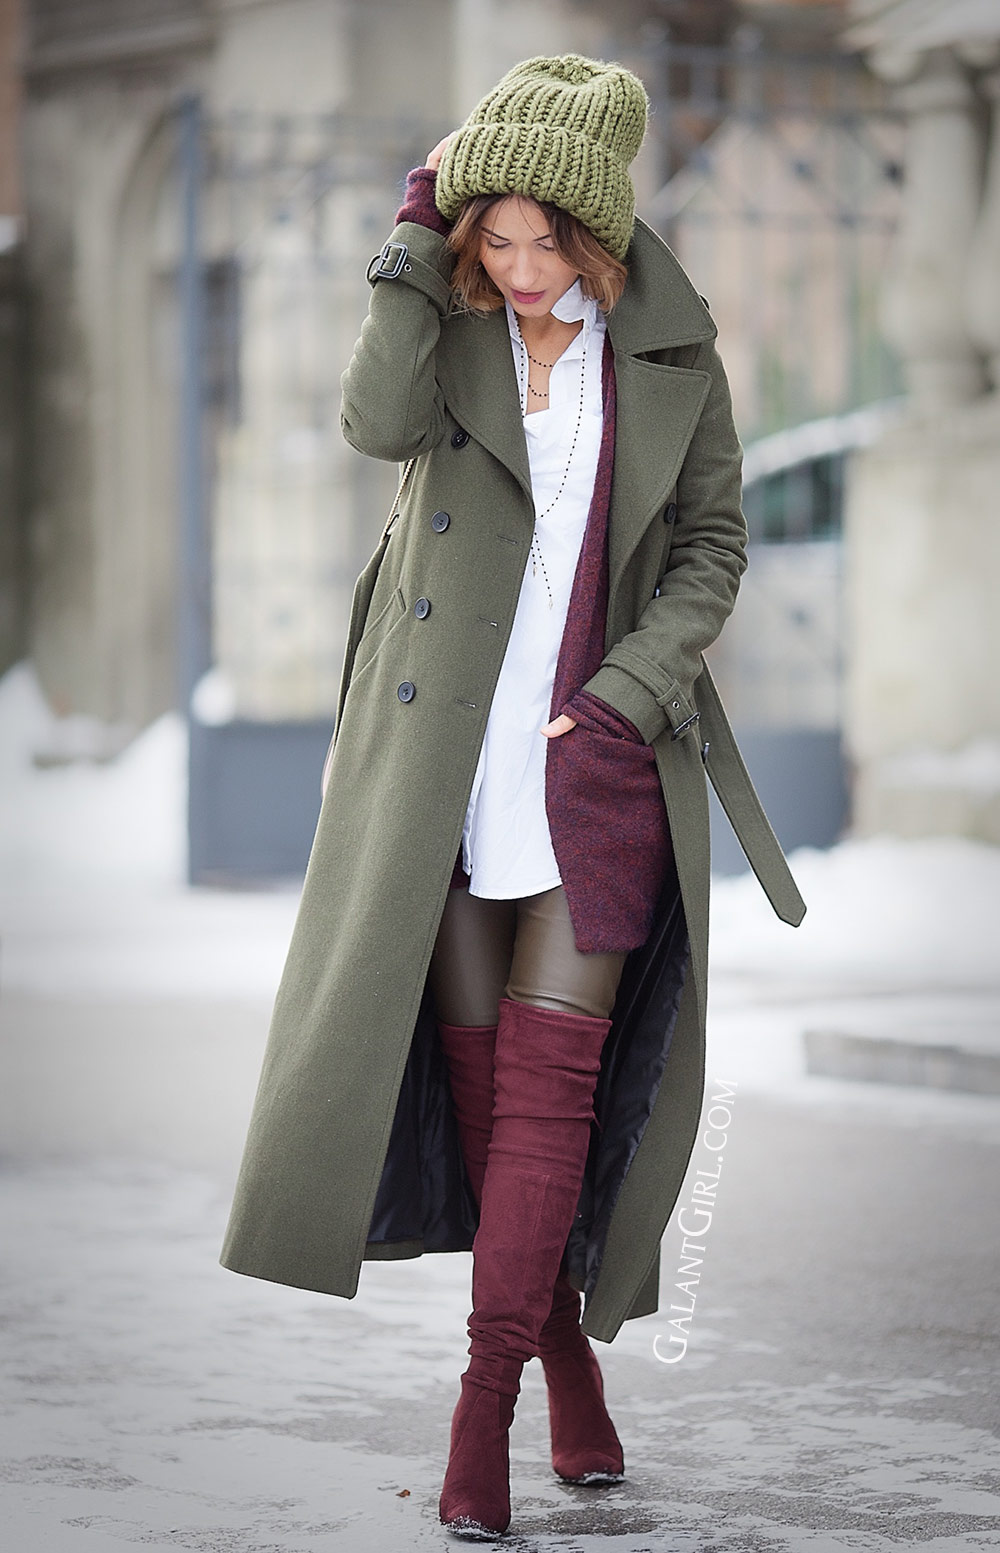 military coat outfit for winter with Stuart Weitzman Over The Knee Boots and Chloe Drew bag by fashion blogger Ellena Galant 